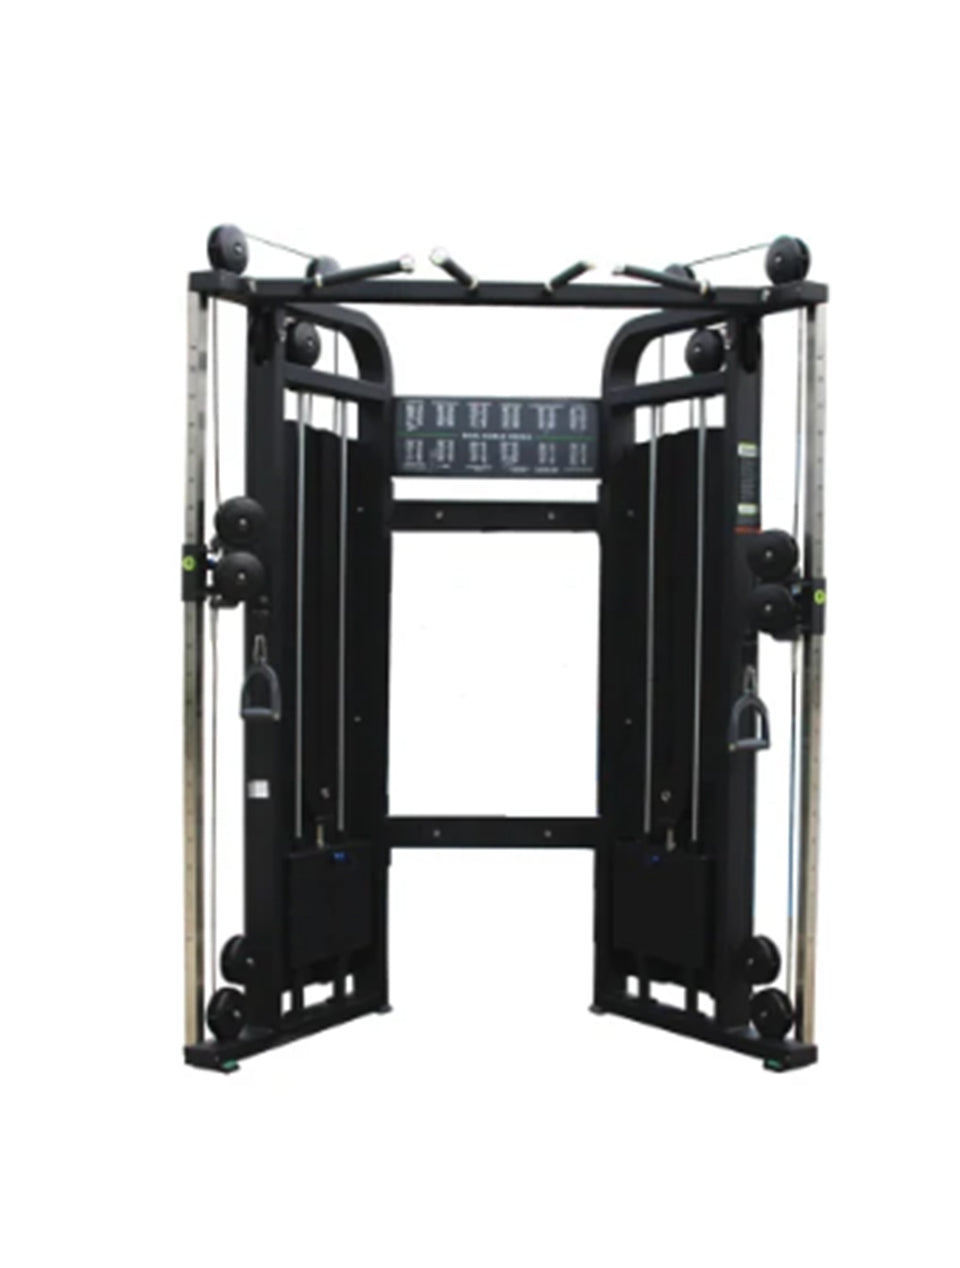 1441 Fitness  Dual Pulley Functional Trainer - 140 kg Weight Stack - 41FG13